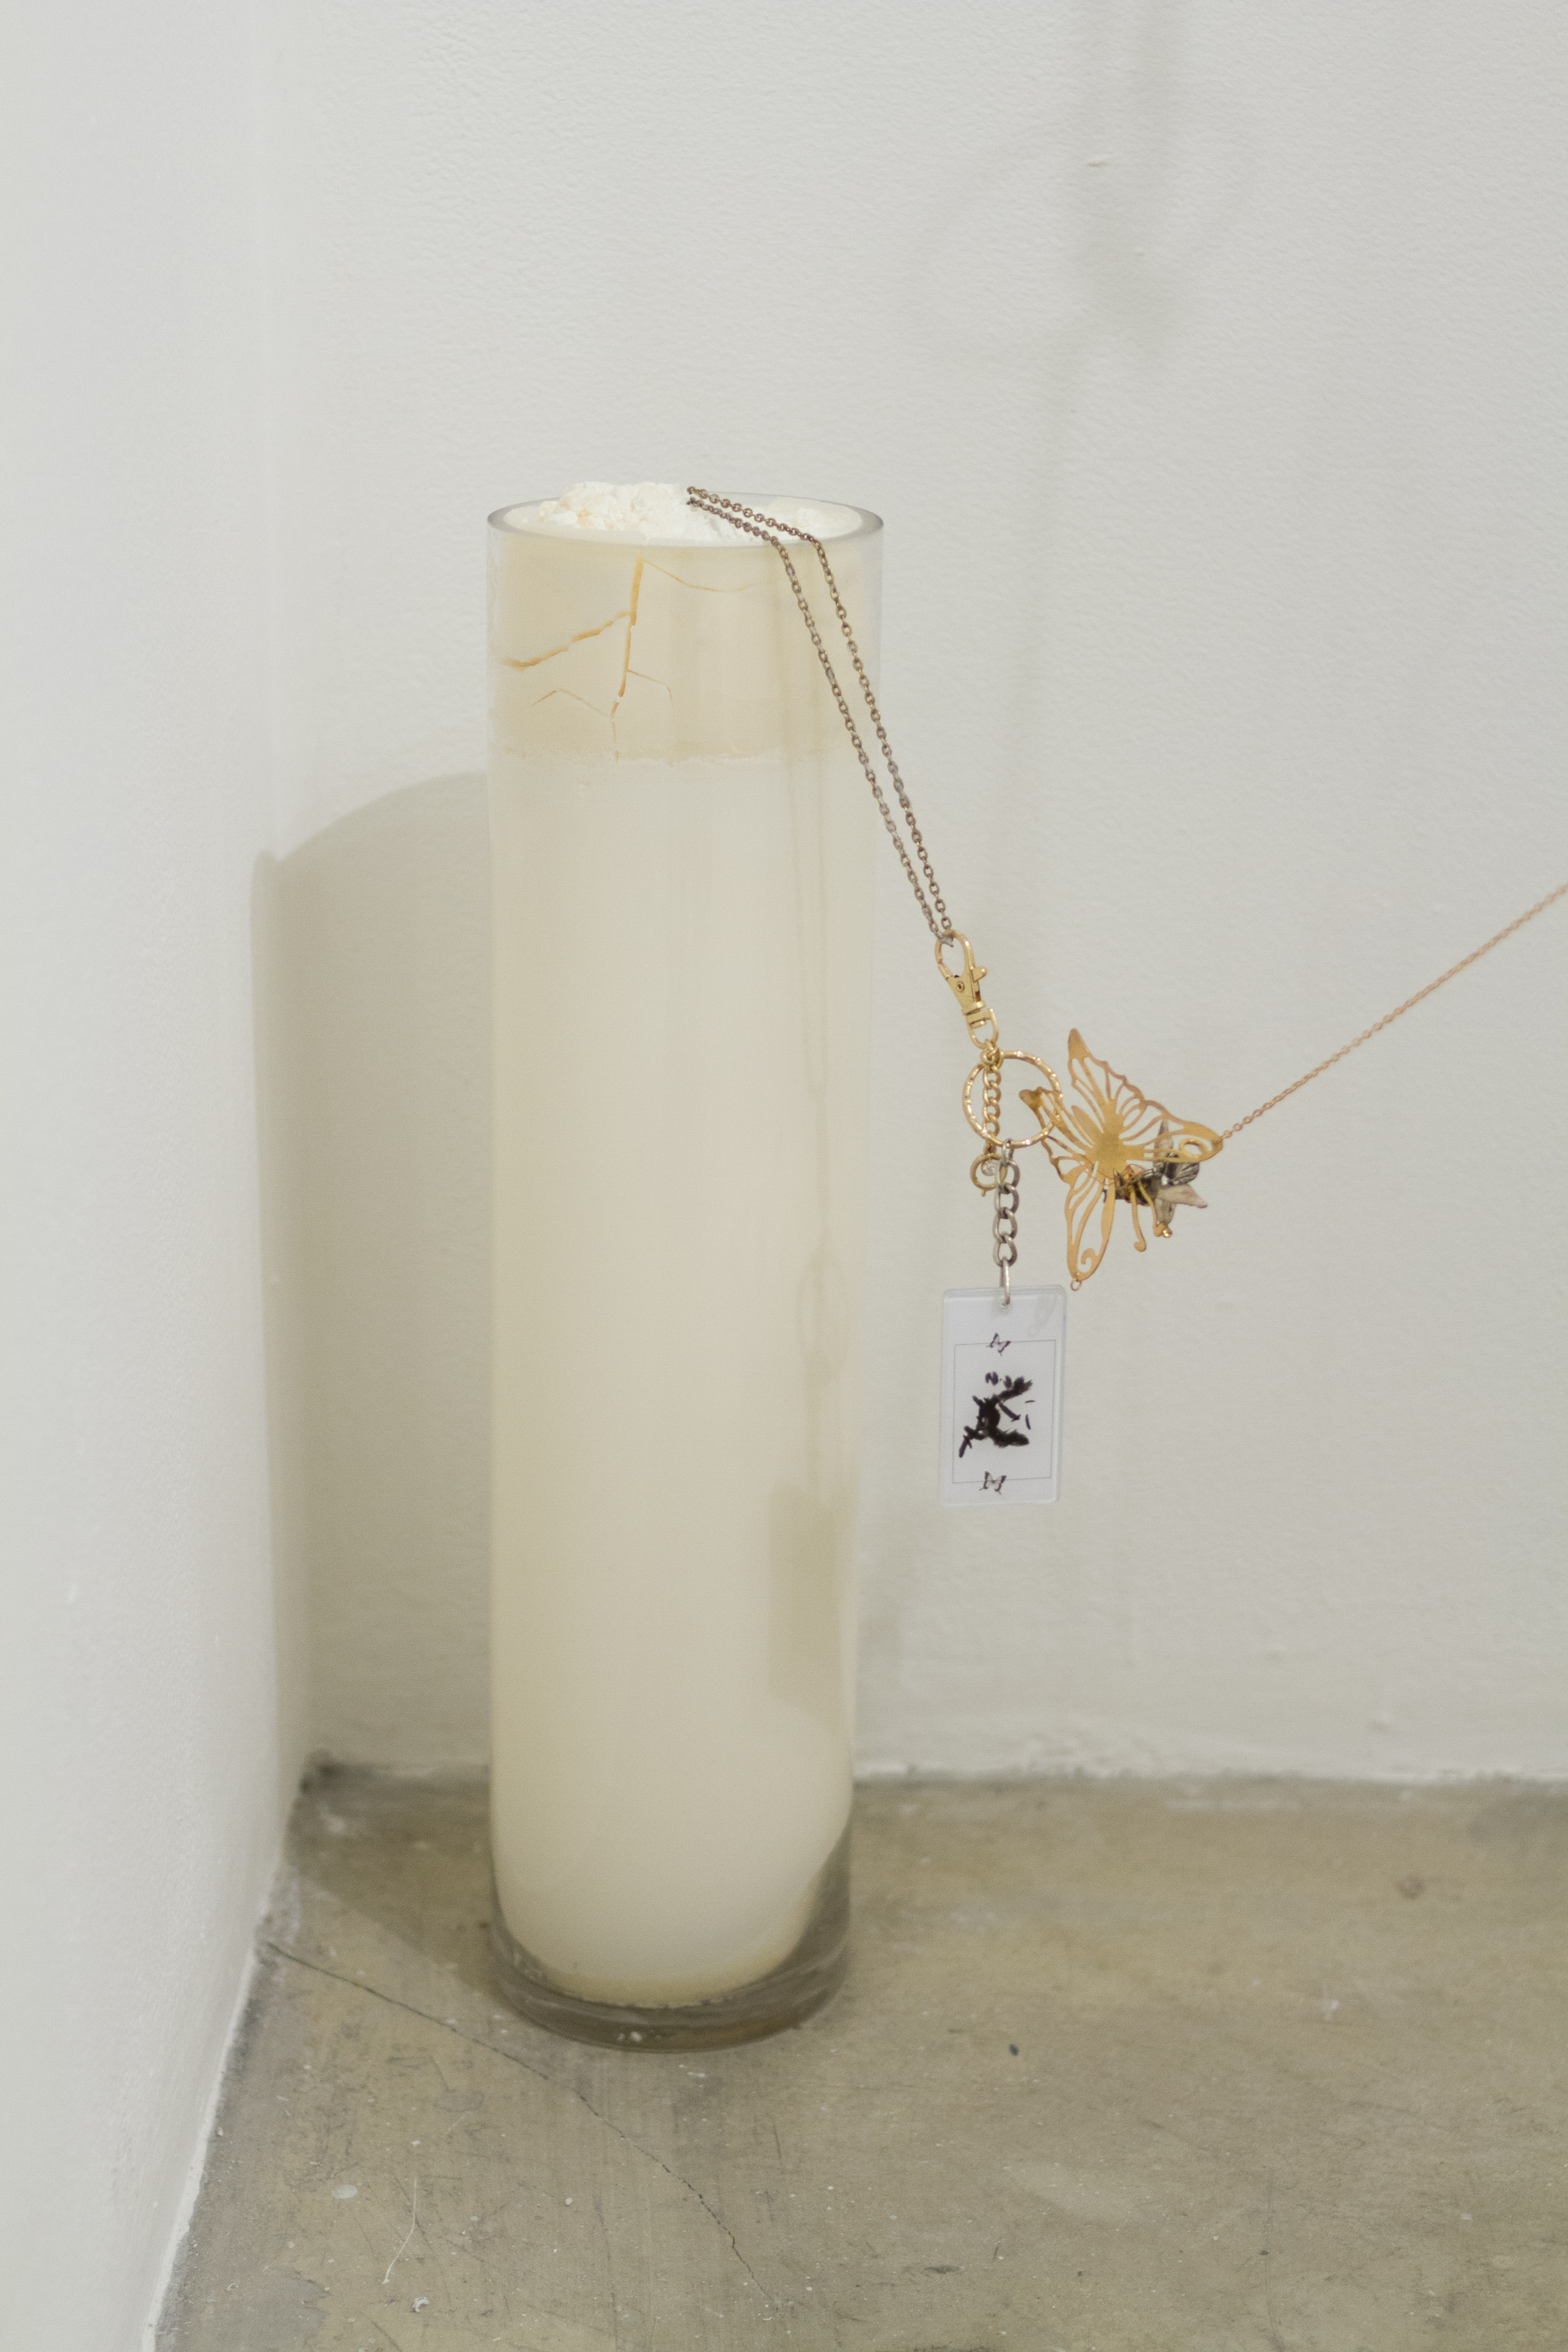 A glass column filled with white wax with delicate charms and chains attached to it